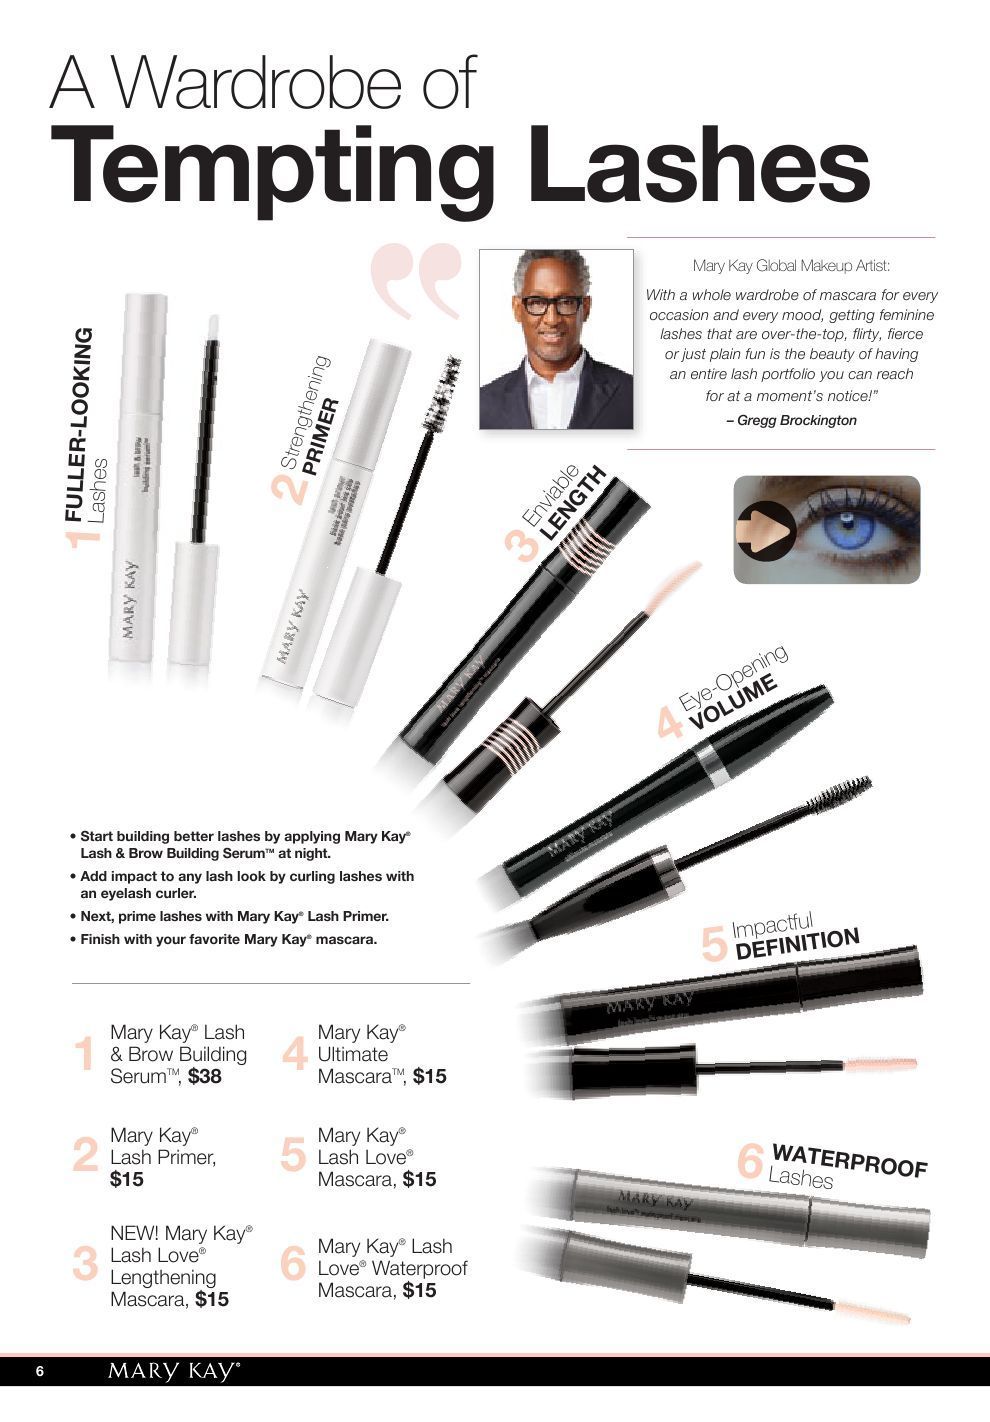 Mary Kay Mascaras = Best. Mascaras. Ever. I absolutely love the Lash Love Waterproof mascara, but I think I need to try the new